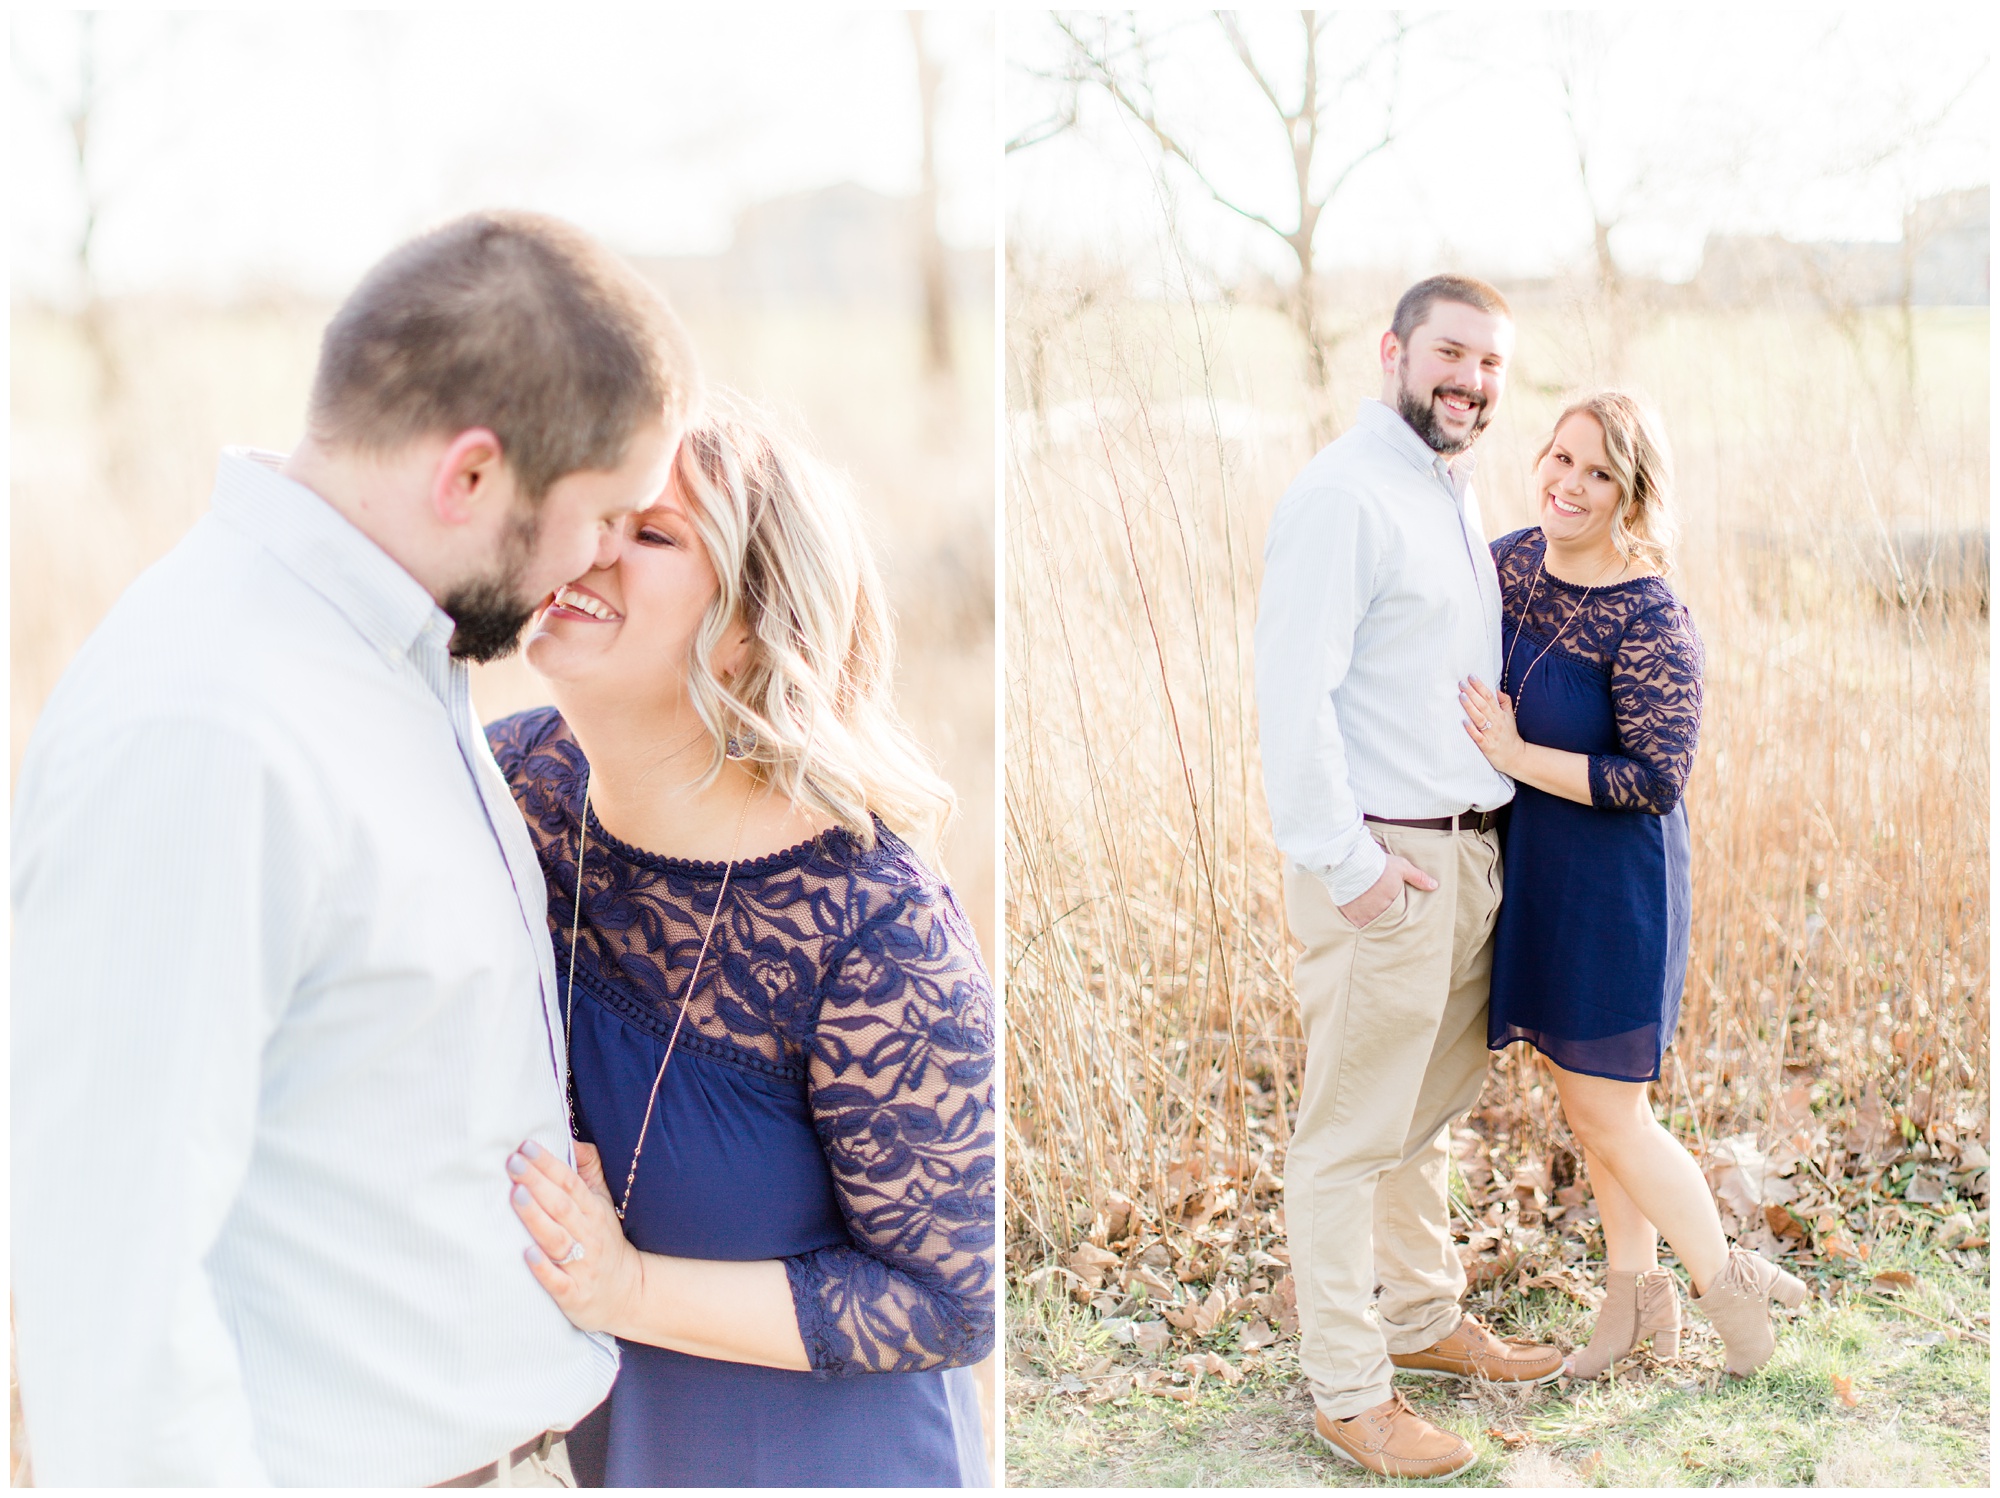 Forest Park Engagement Session Emily Broadbent Photography